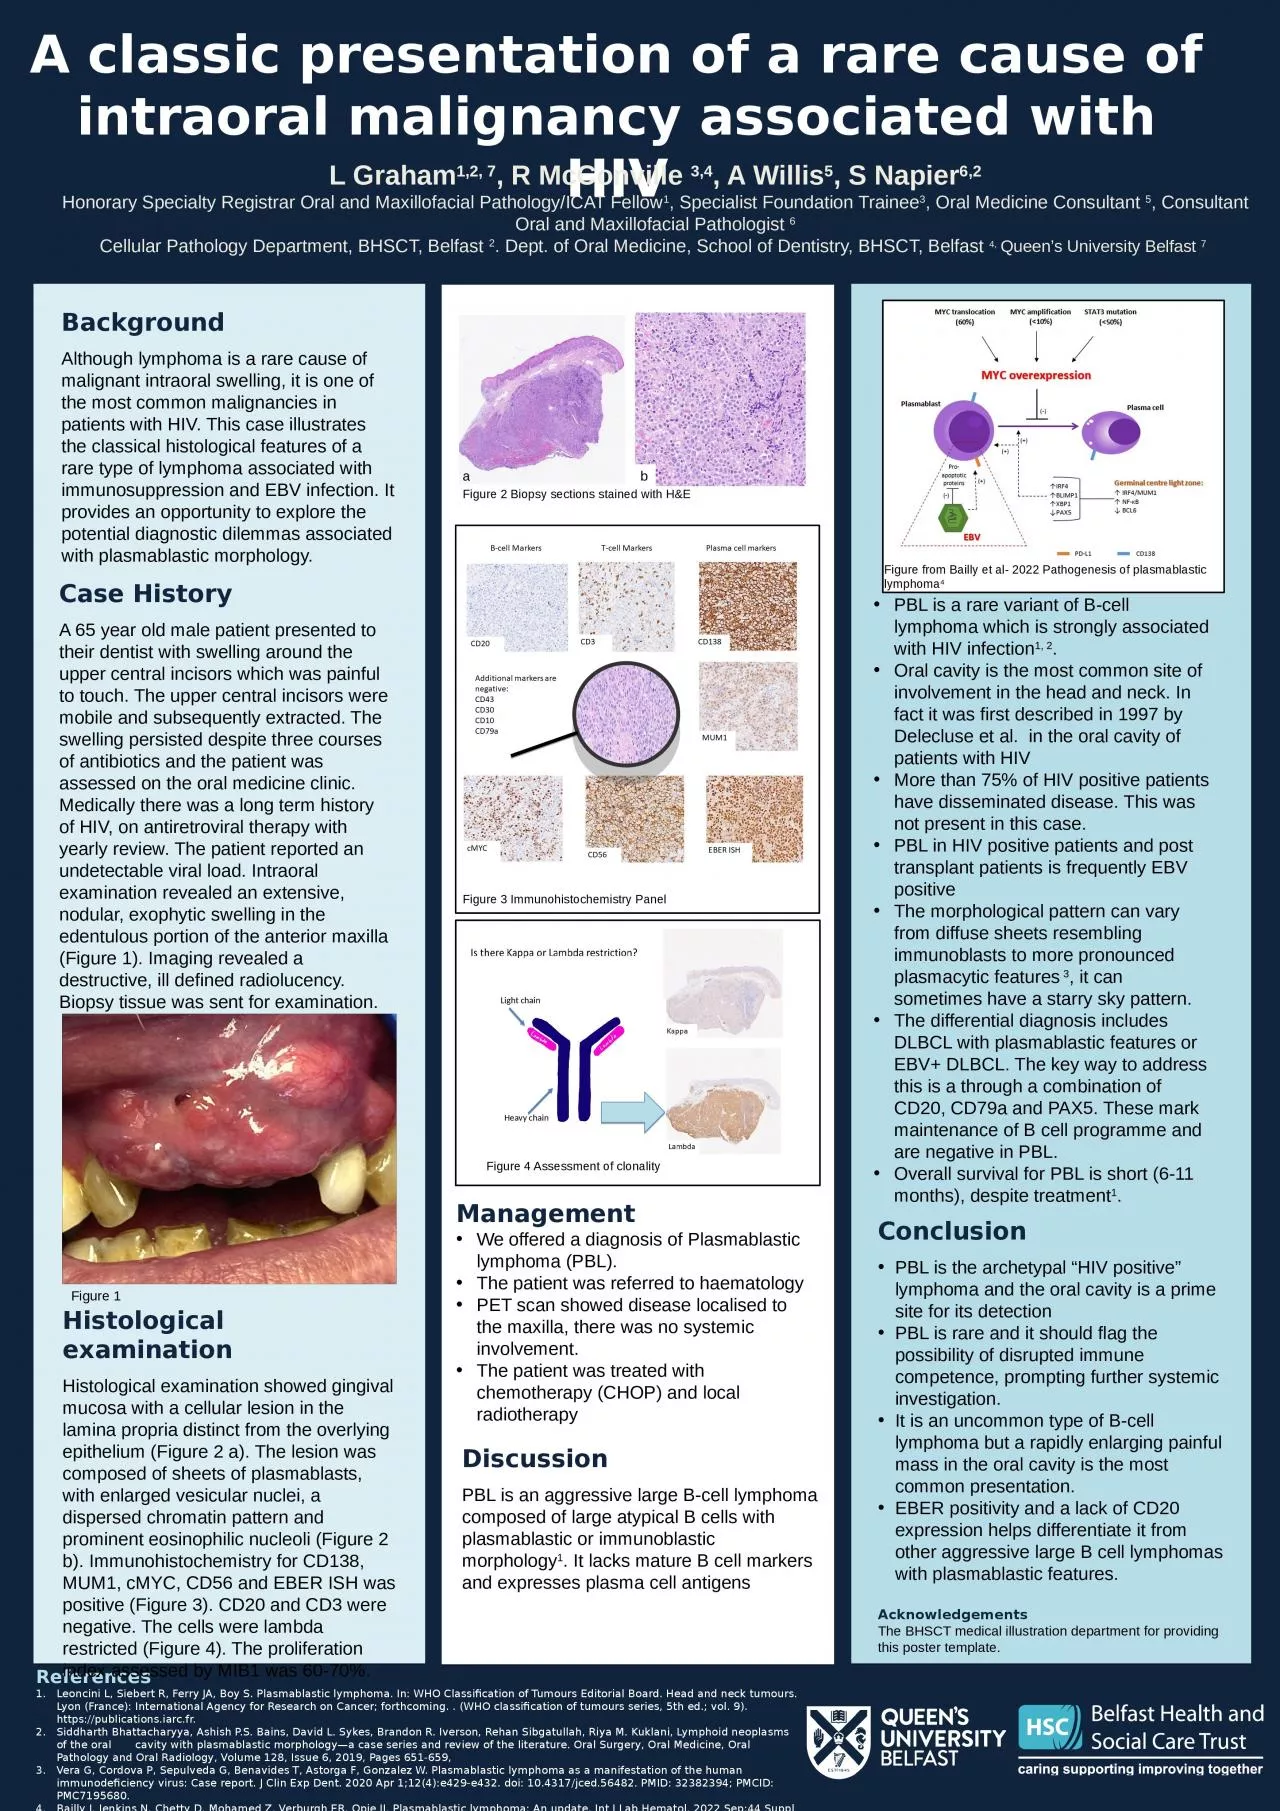 A classic presentation of a rare cause of intraoral malignancy associated with HIV